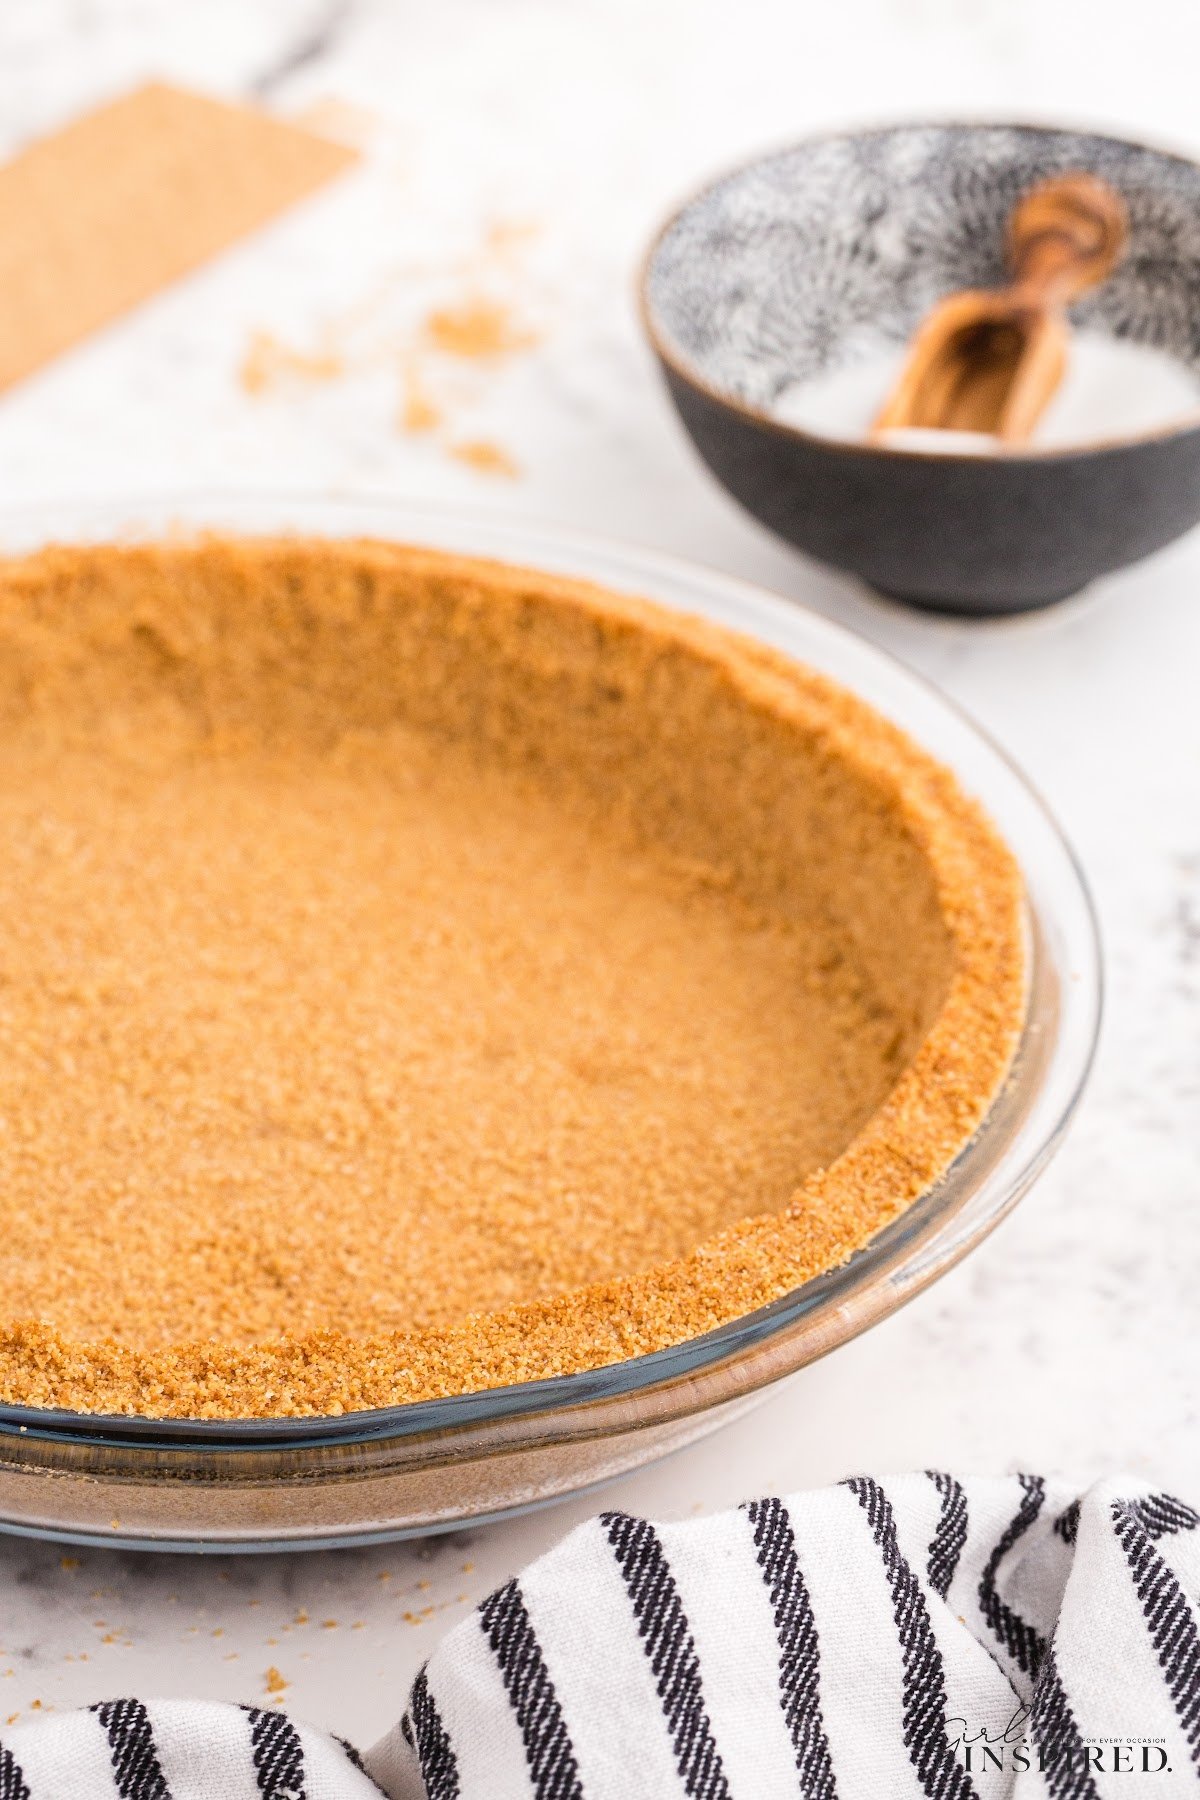 A graham cracker pie crust after setting in a glass pie plate next to a towel and sugar.